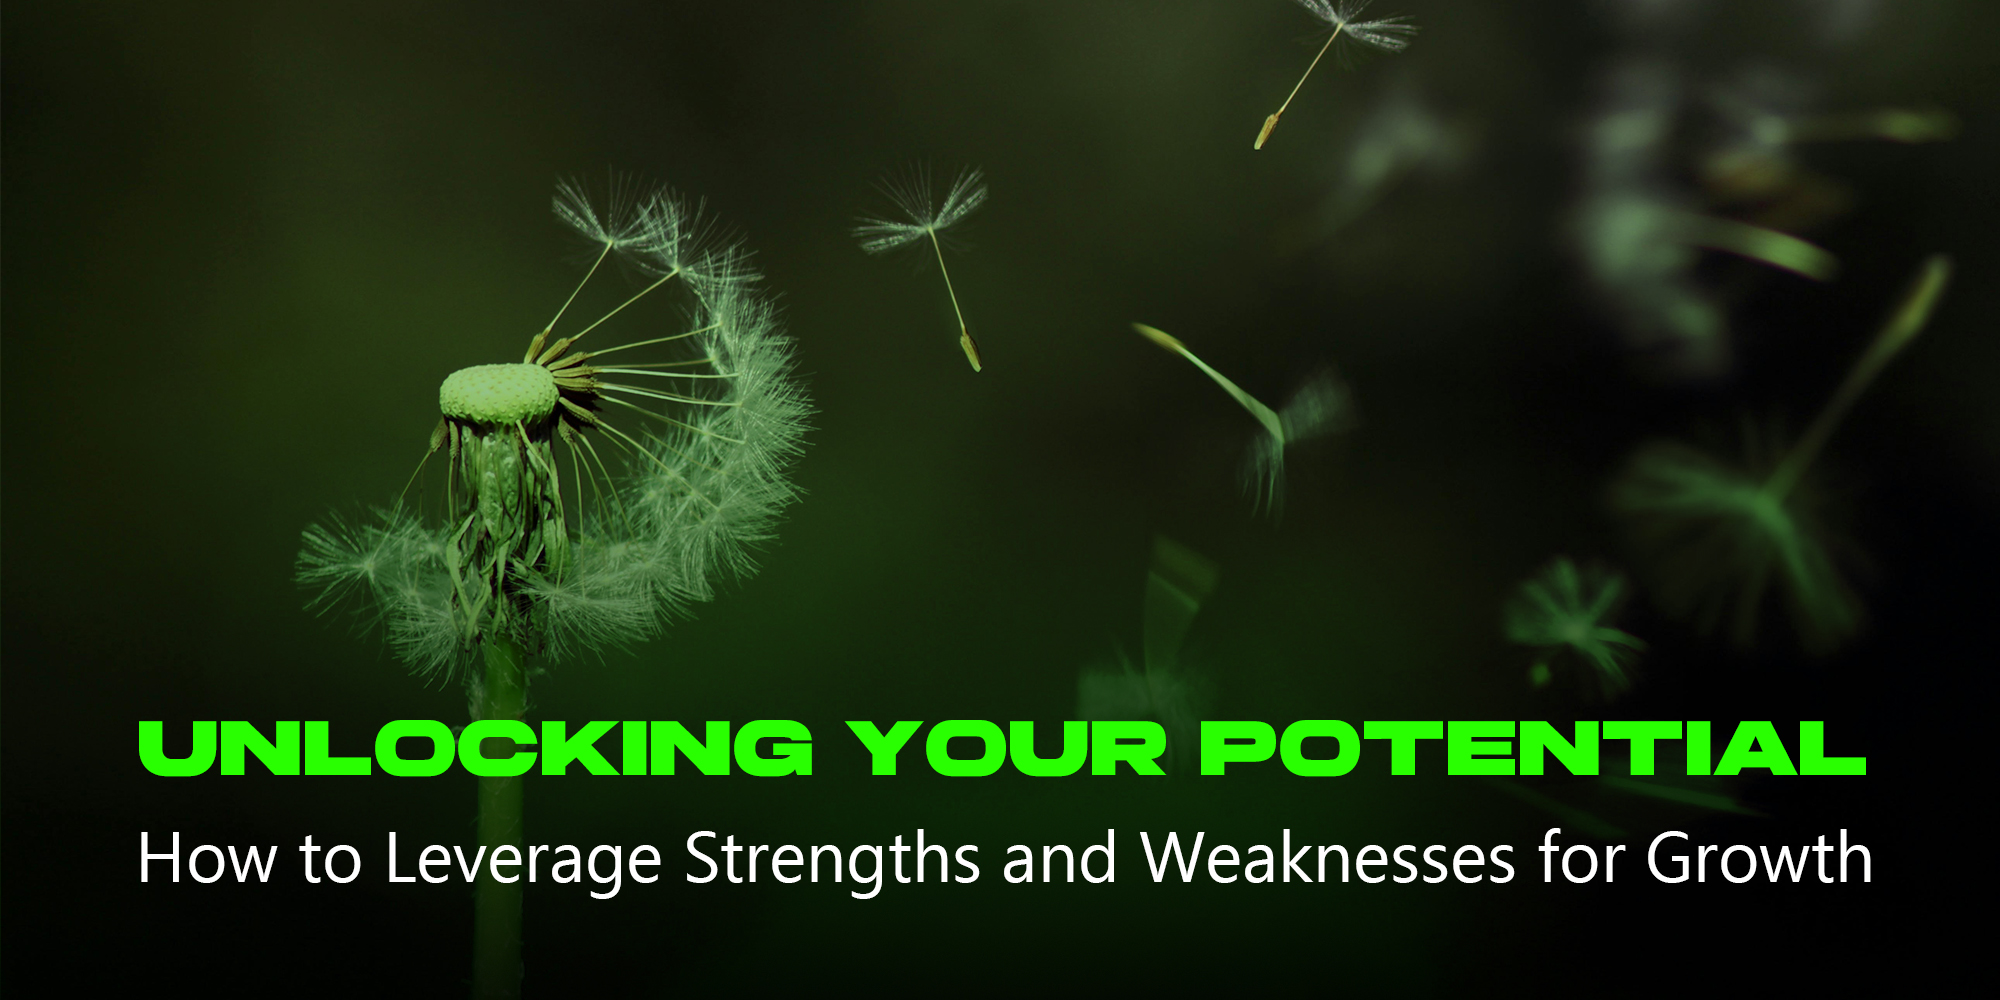 Unlocking Your Potential: How to Leverage Strengths and Weaknesses for Growth